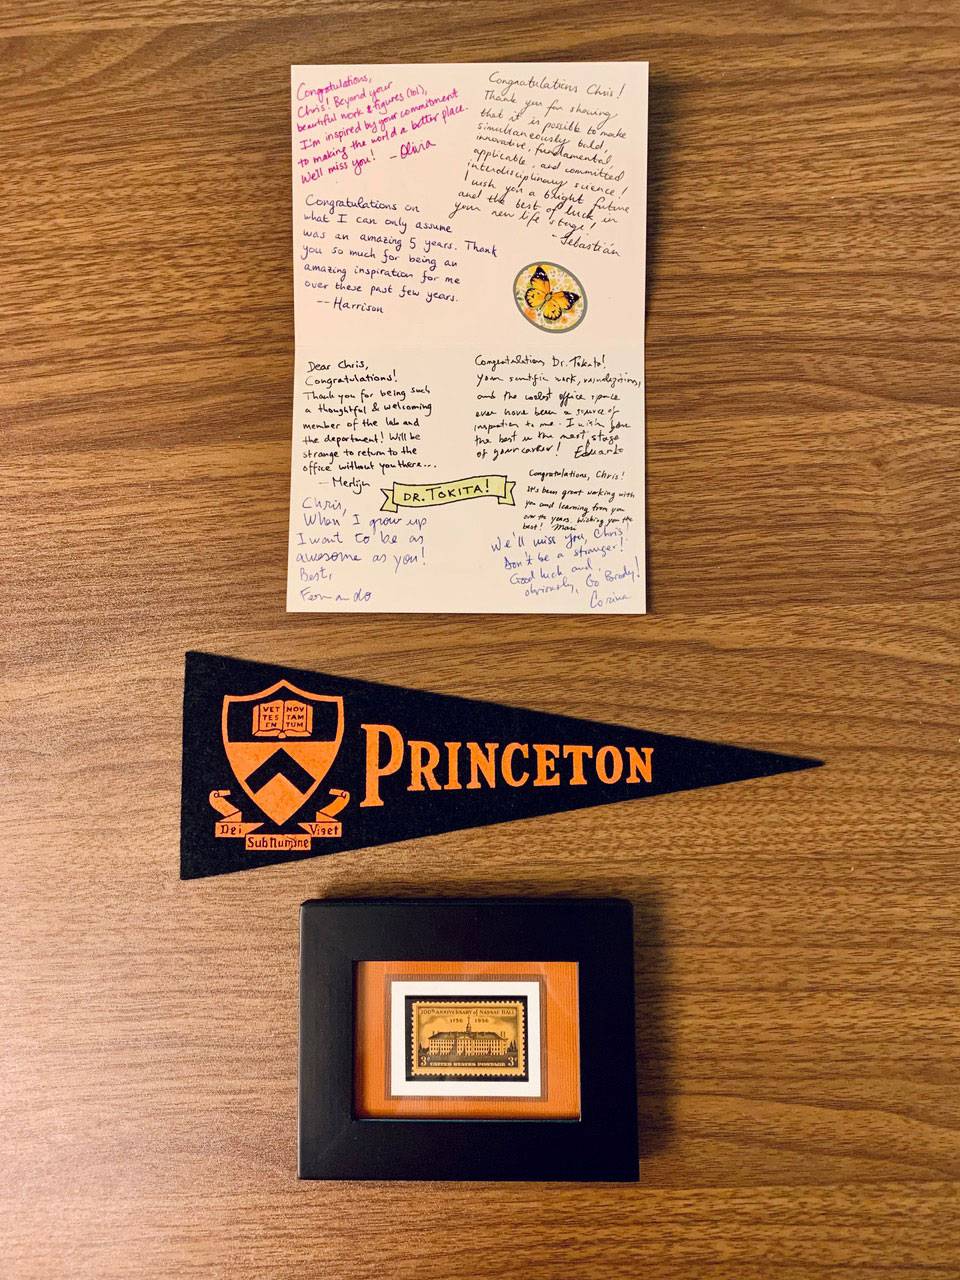 Hooding mementos: a signed card, a pennant, and stamp in a frame